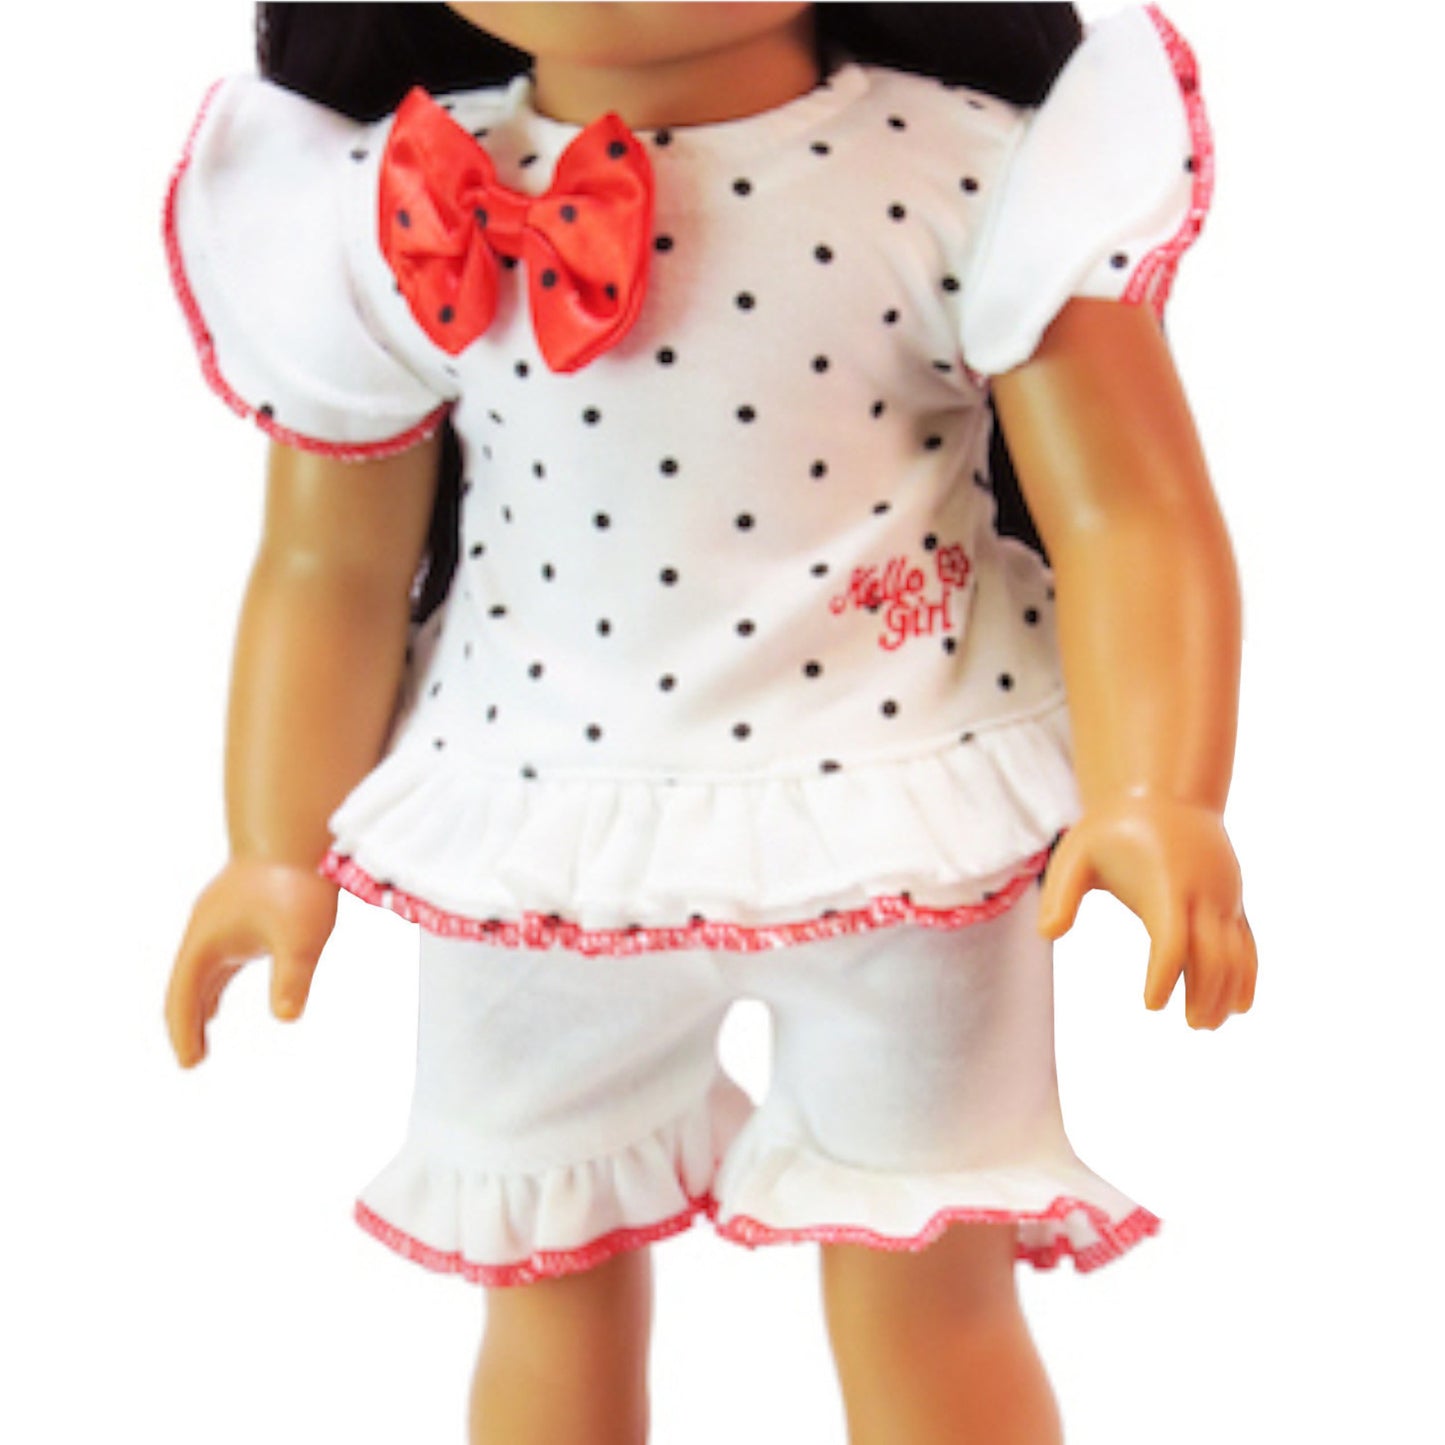 Polka Dot Shorts Set for 18-in ch dolls with doll Up Close